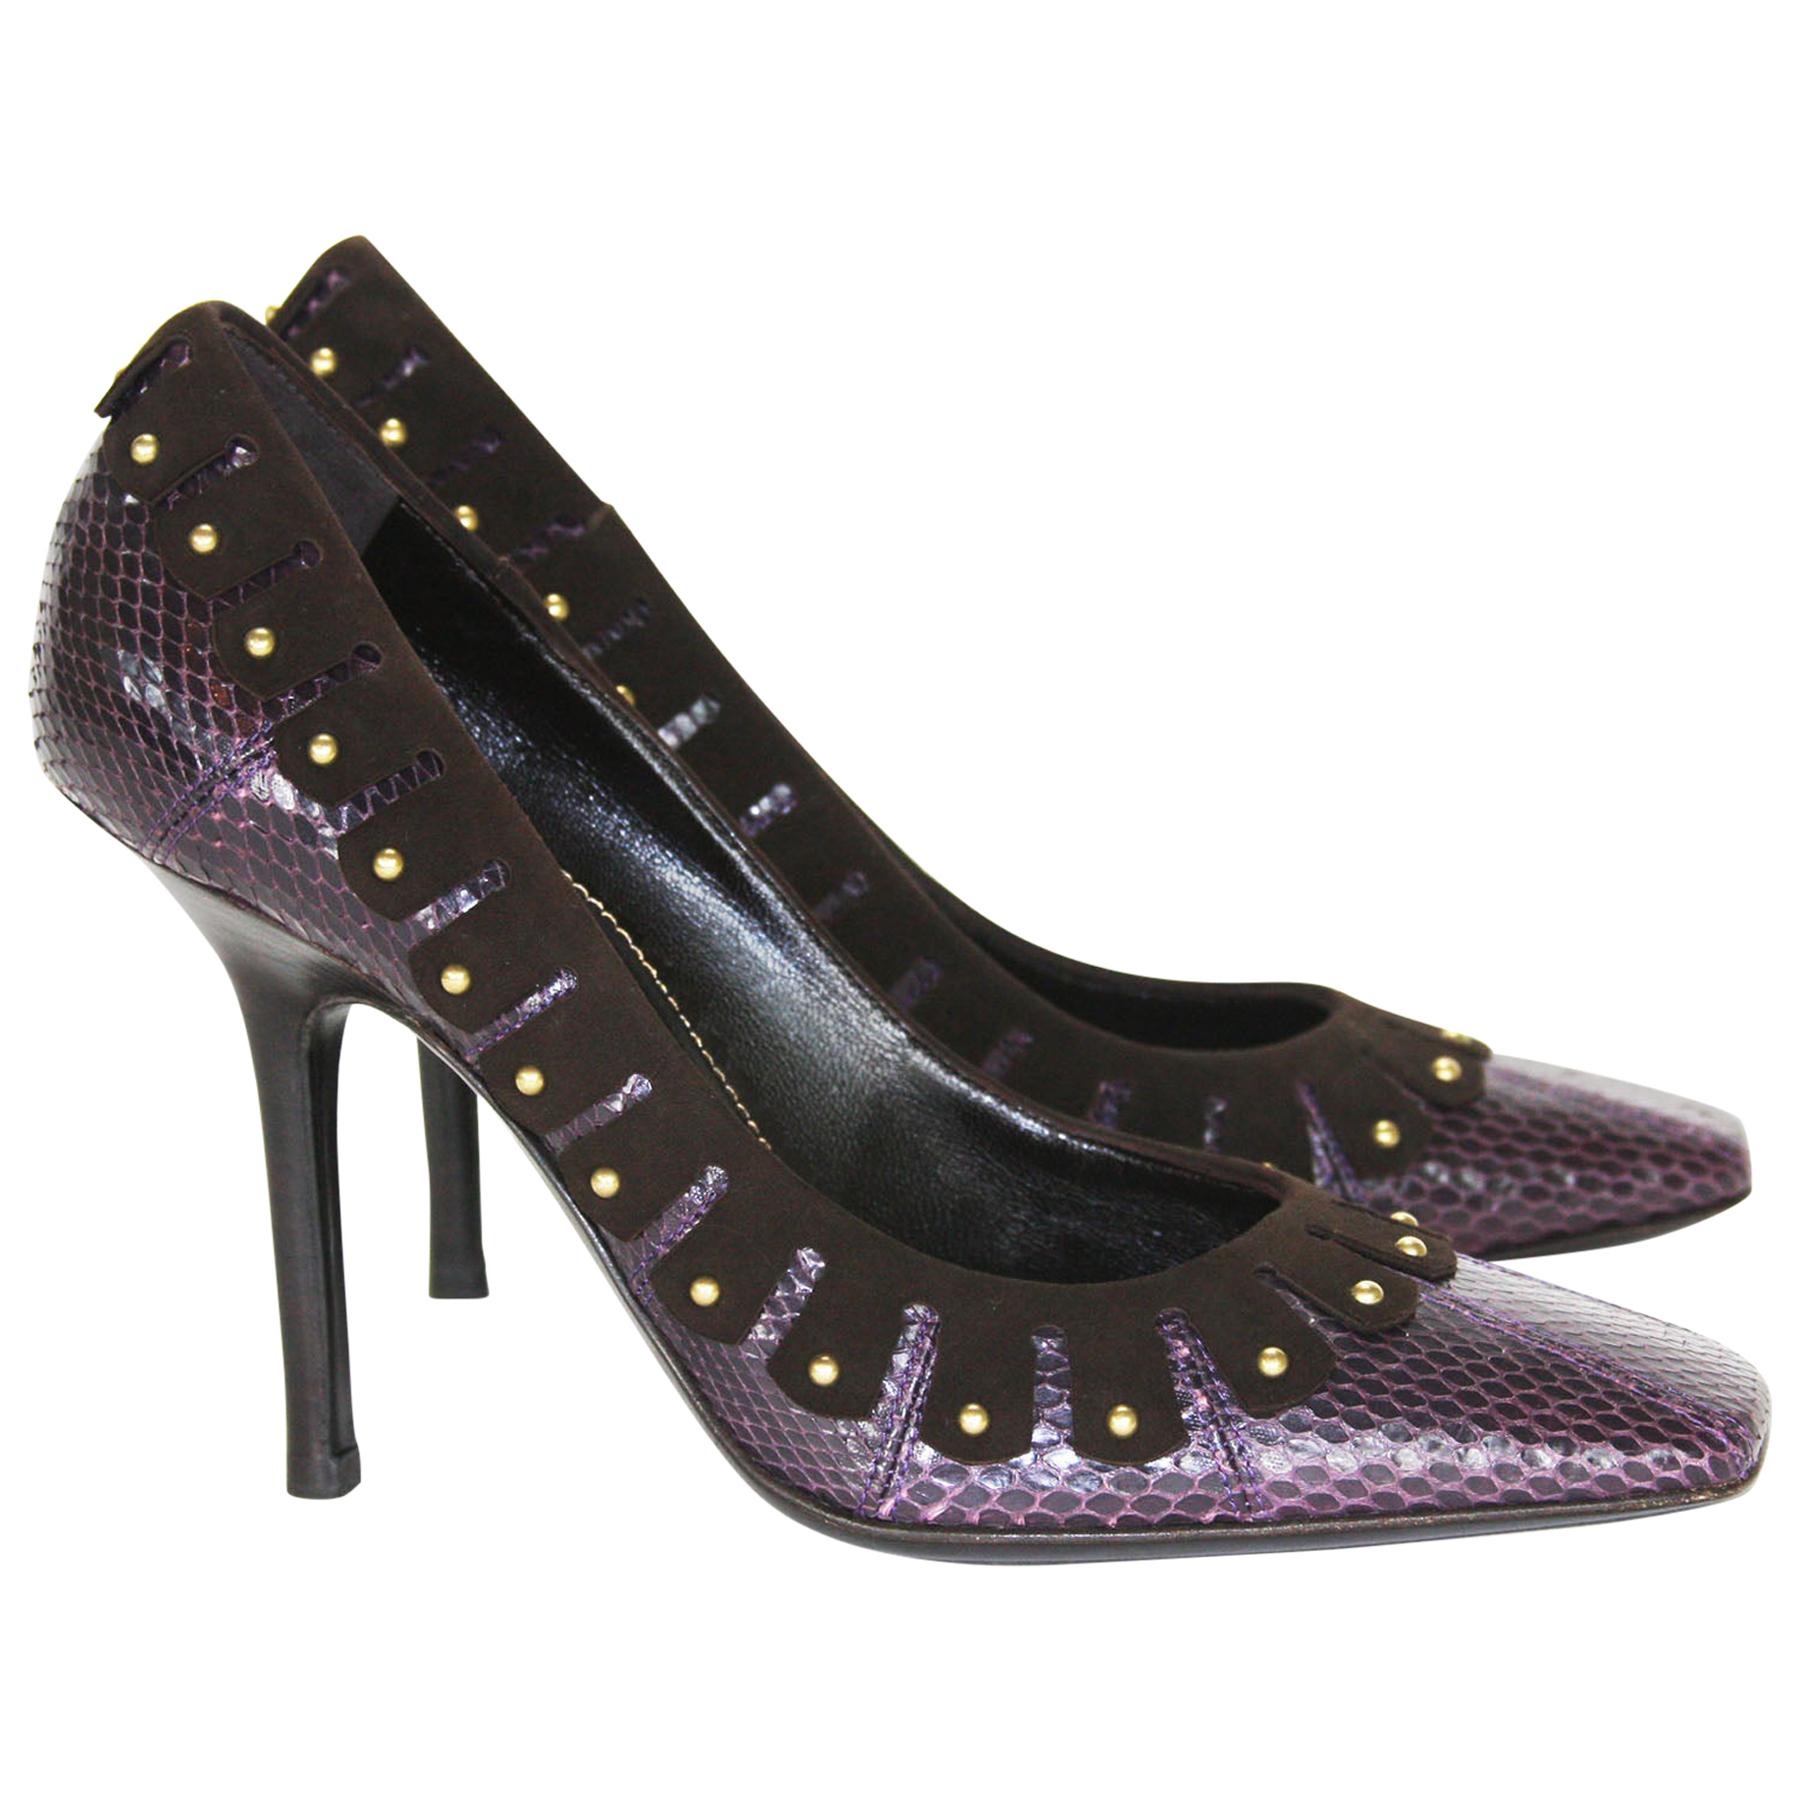 New Tom Ford for Yves Saint Laurent Snake Studded Plum Pumps Shoes 37.5  US 7.5 For Sale